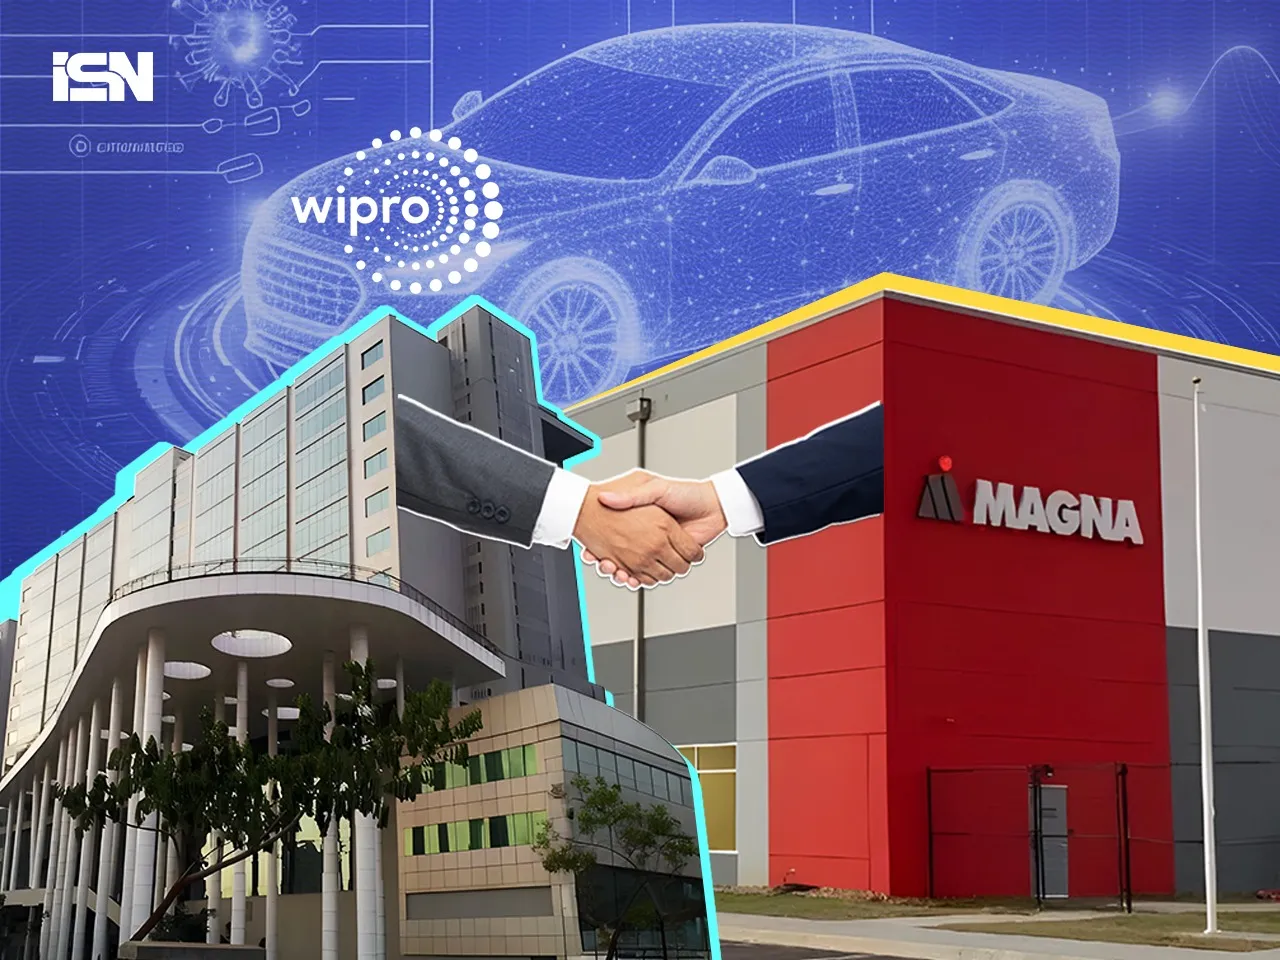 General Motors, Magna, and Wipro to launch SDVerse to transform automotive software market